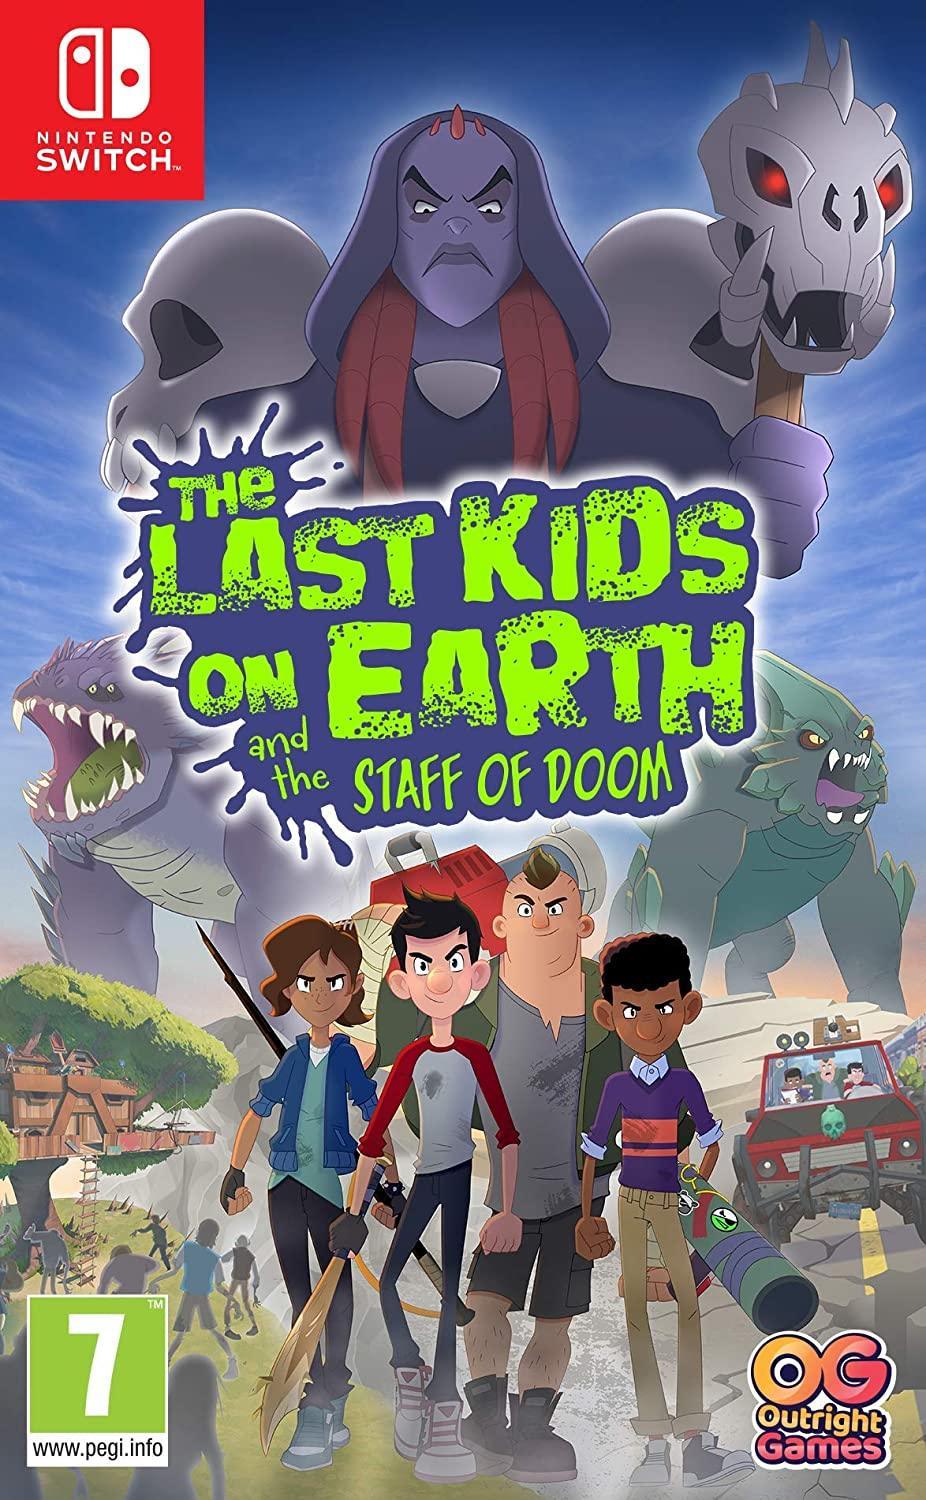 The Last Kids on Earth and the Staff of Doom - Nintendo Switch - GD Games 